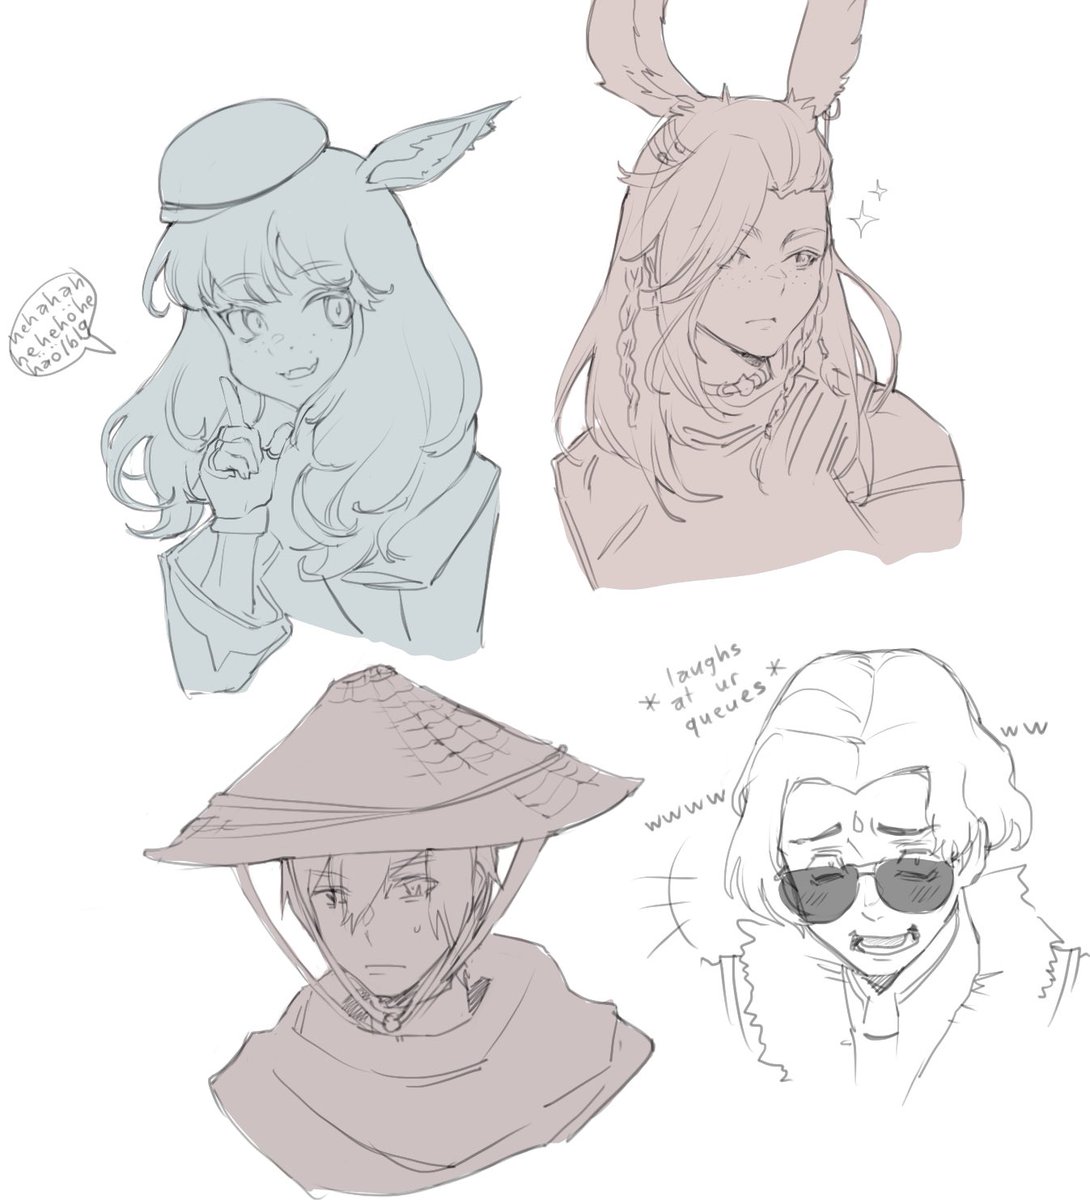 dumb ffxiv doodles i did while waiting in queue 